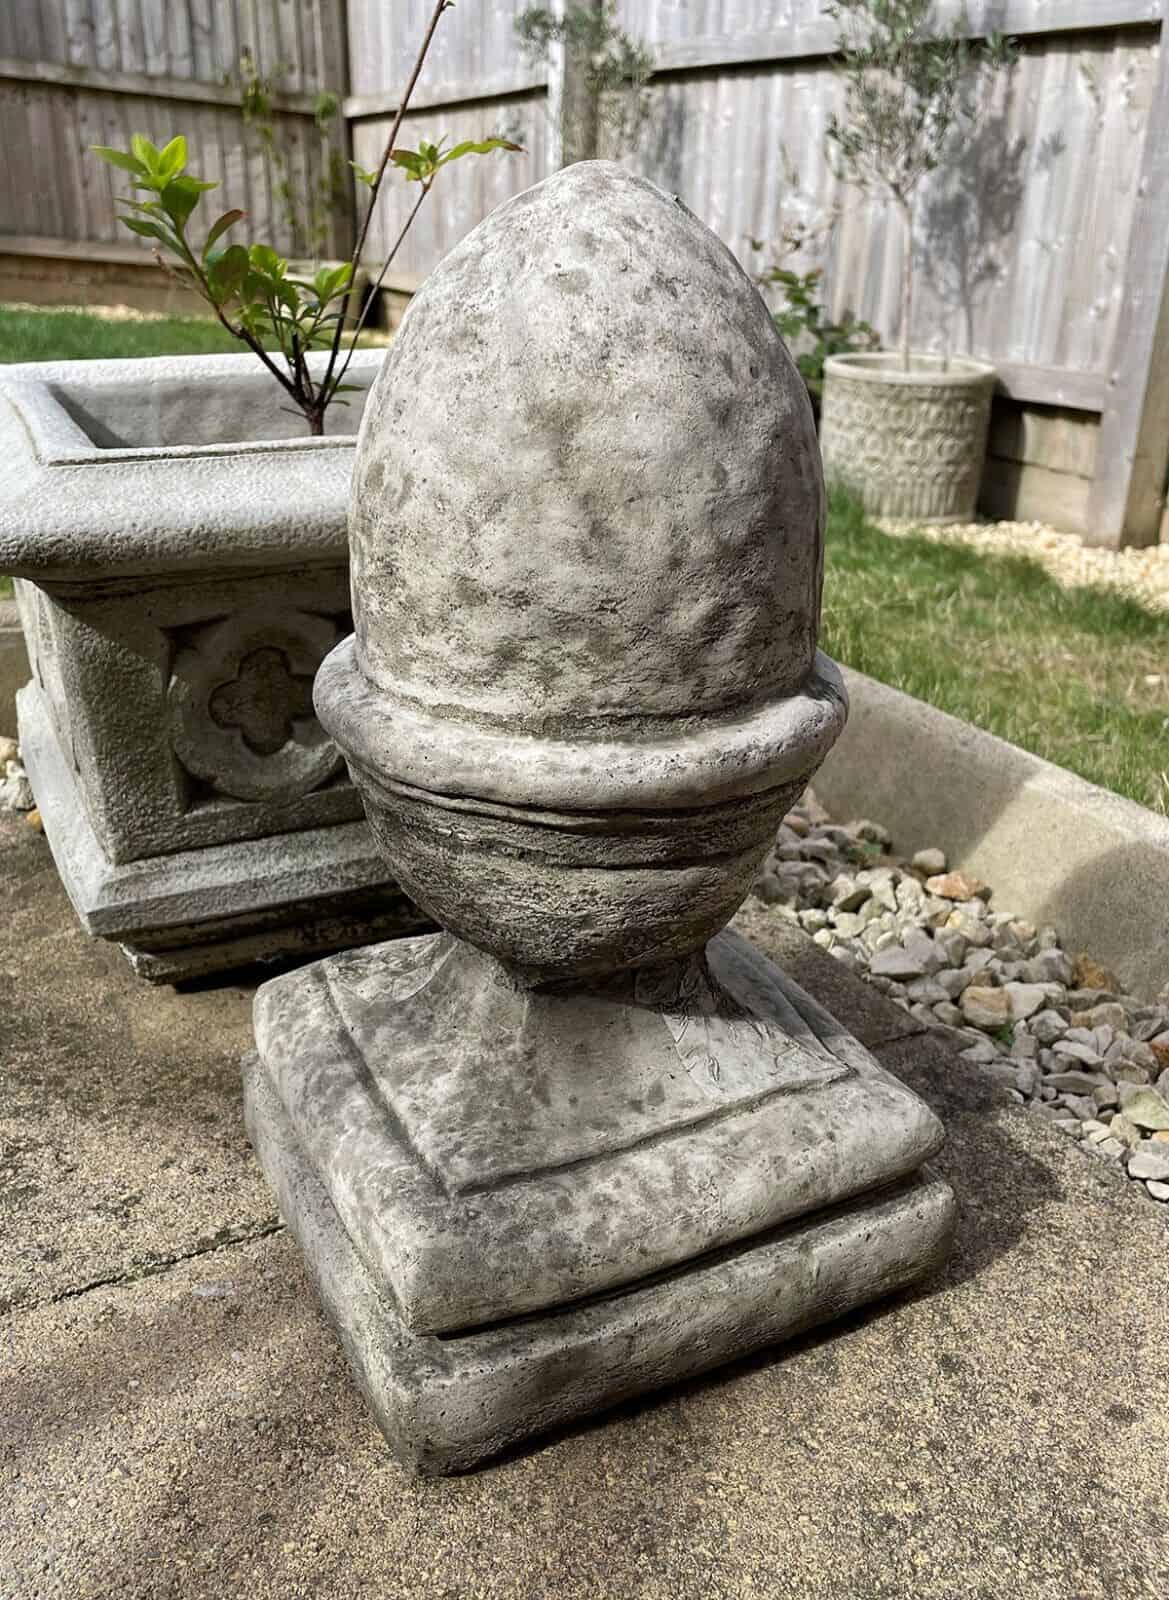 A sizeable finial shaped as an upside-down acorn with a square base. Situated in a British garden